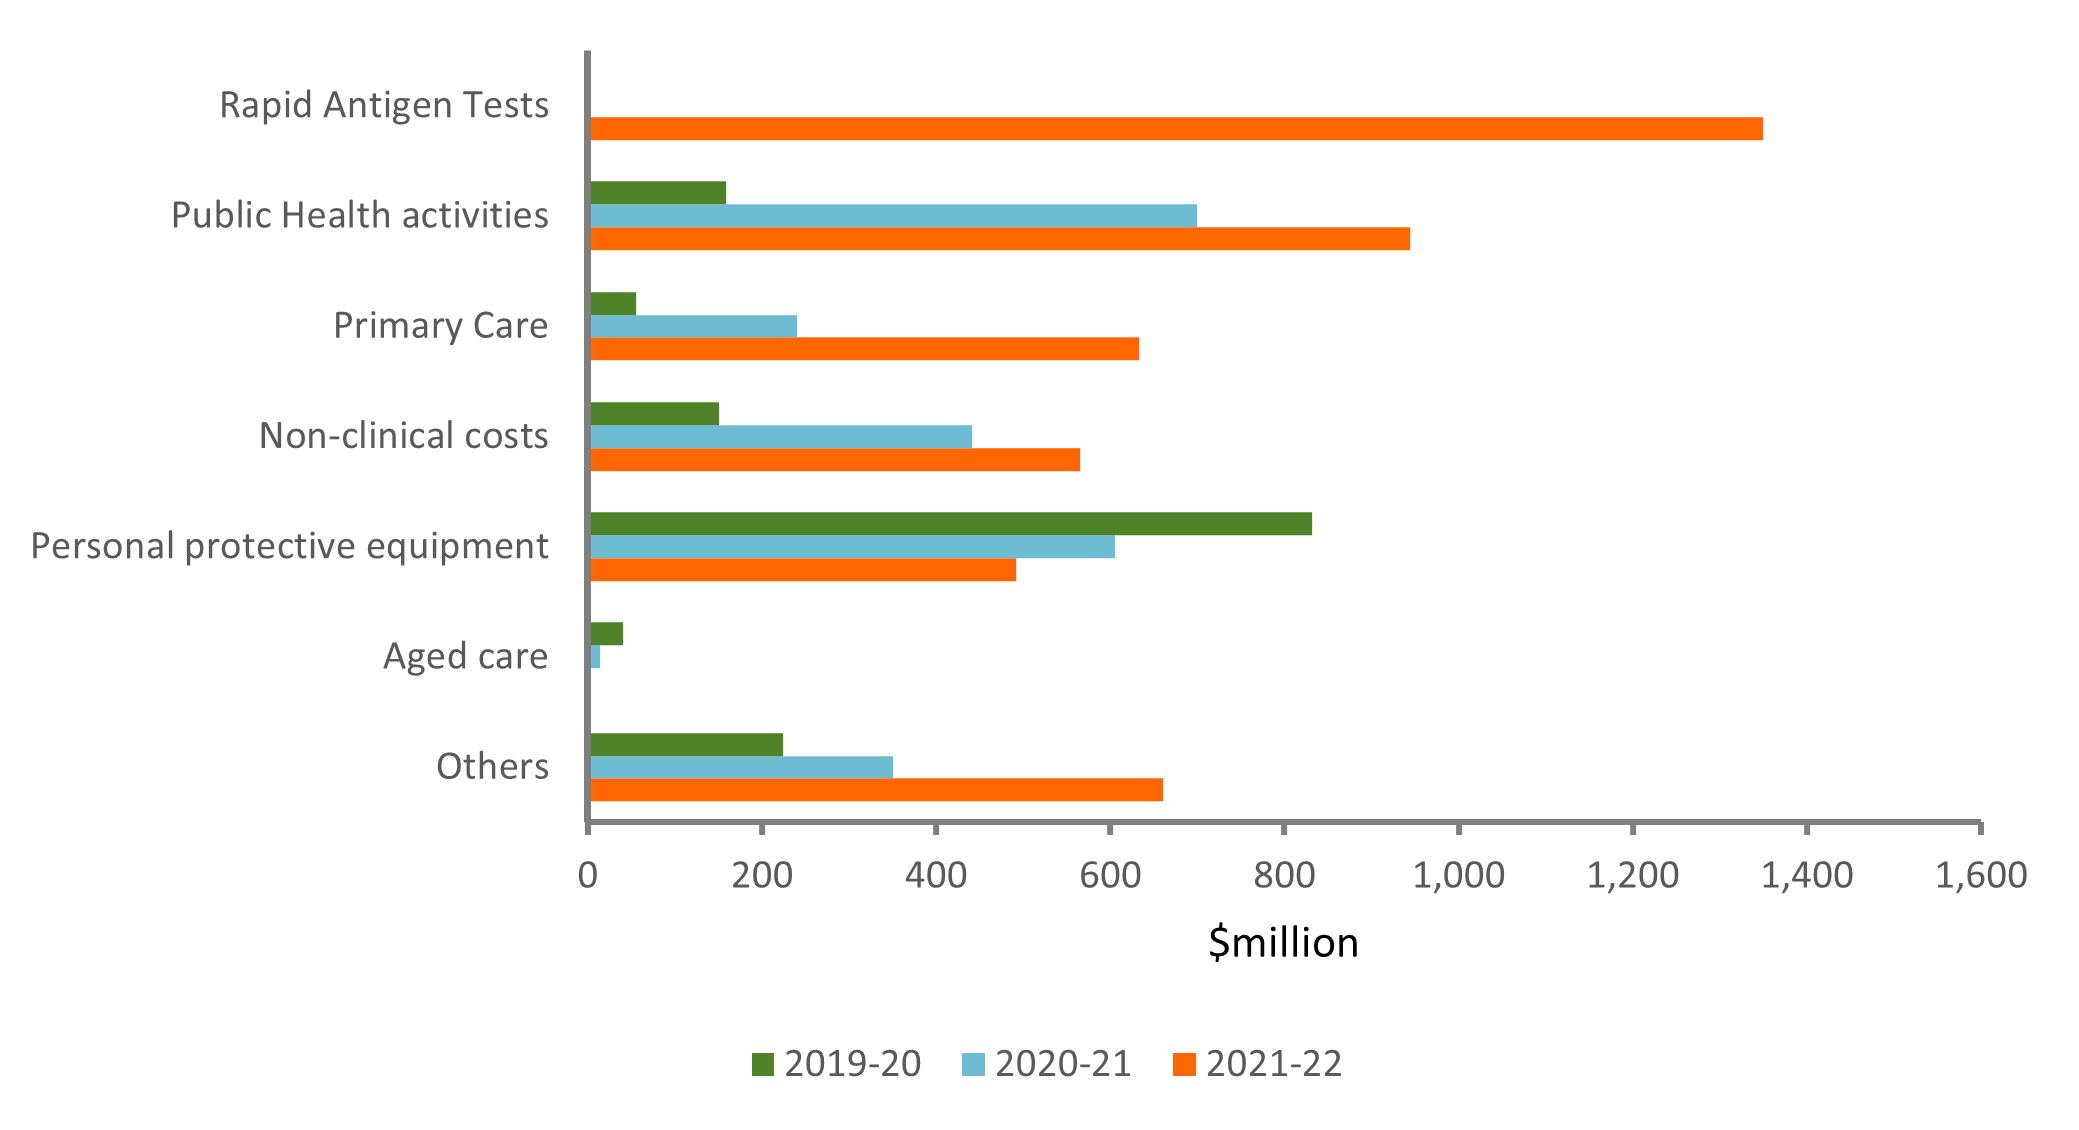 The clustered bar chart shows spending by programs under State Public Health payments from 2019-20 to 2021-22. The highest spending was for PPE in 2019-20, public health activities in 202021 and rapid antigen tests in 2021-22 